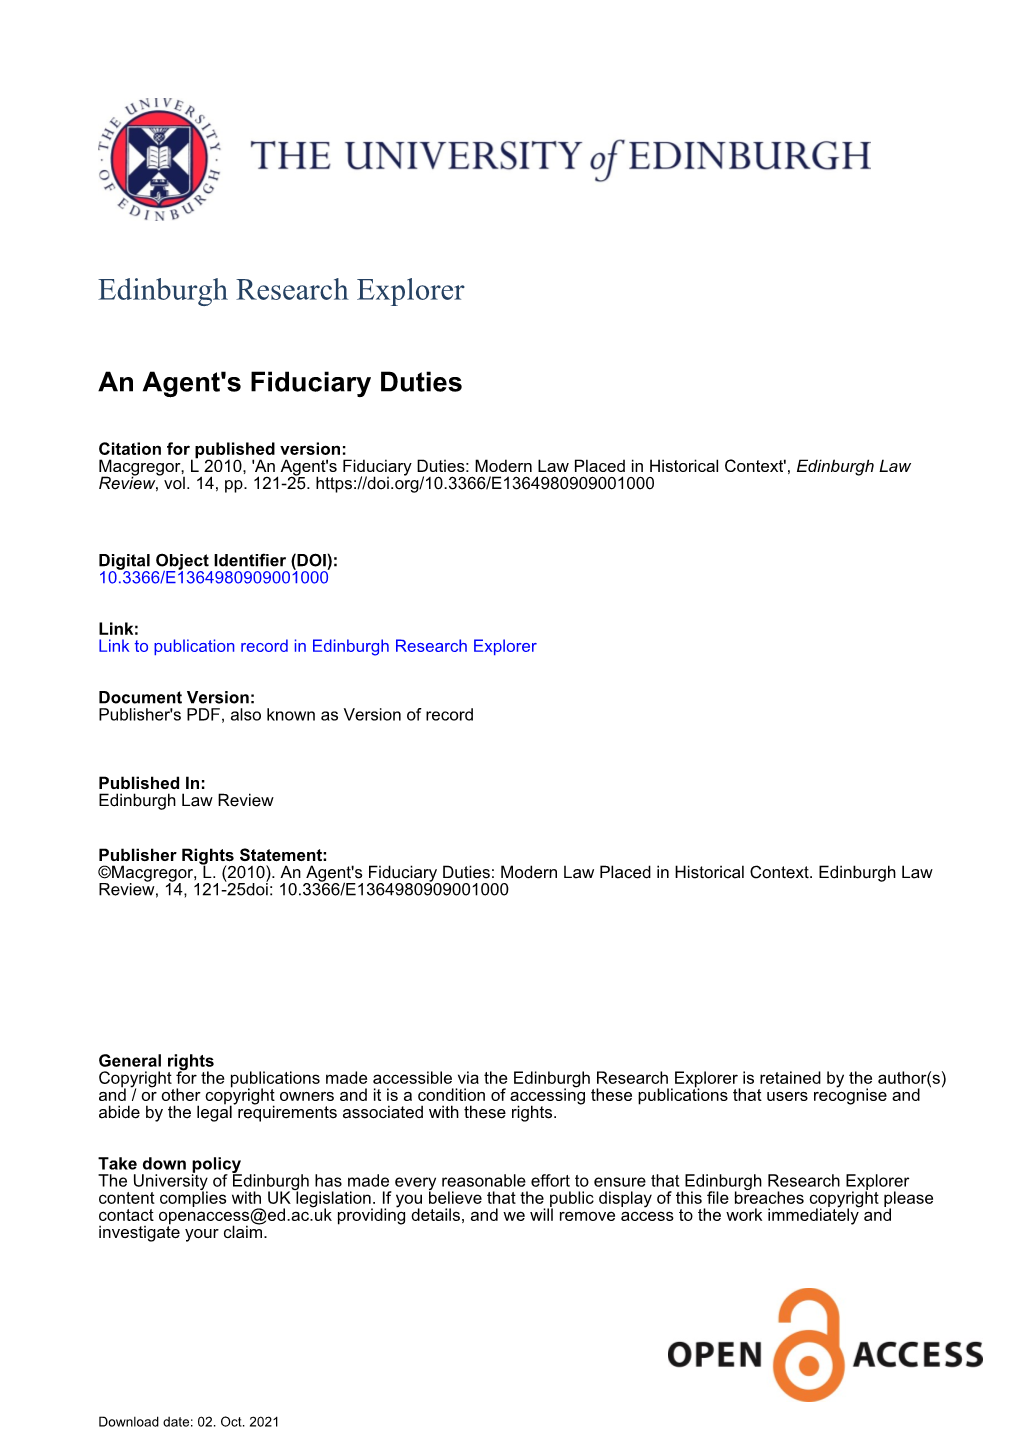 An Agent's Fiduciary Duties: Modern Law Placed in Historical Context', Edinburgh Law Review, Vol